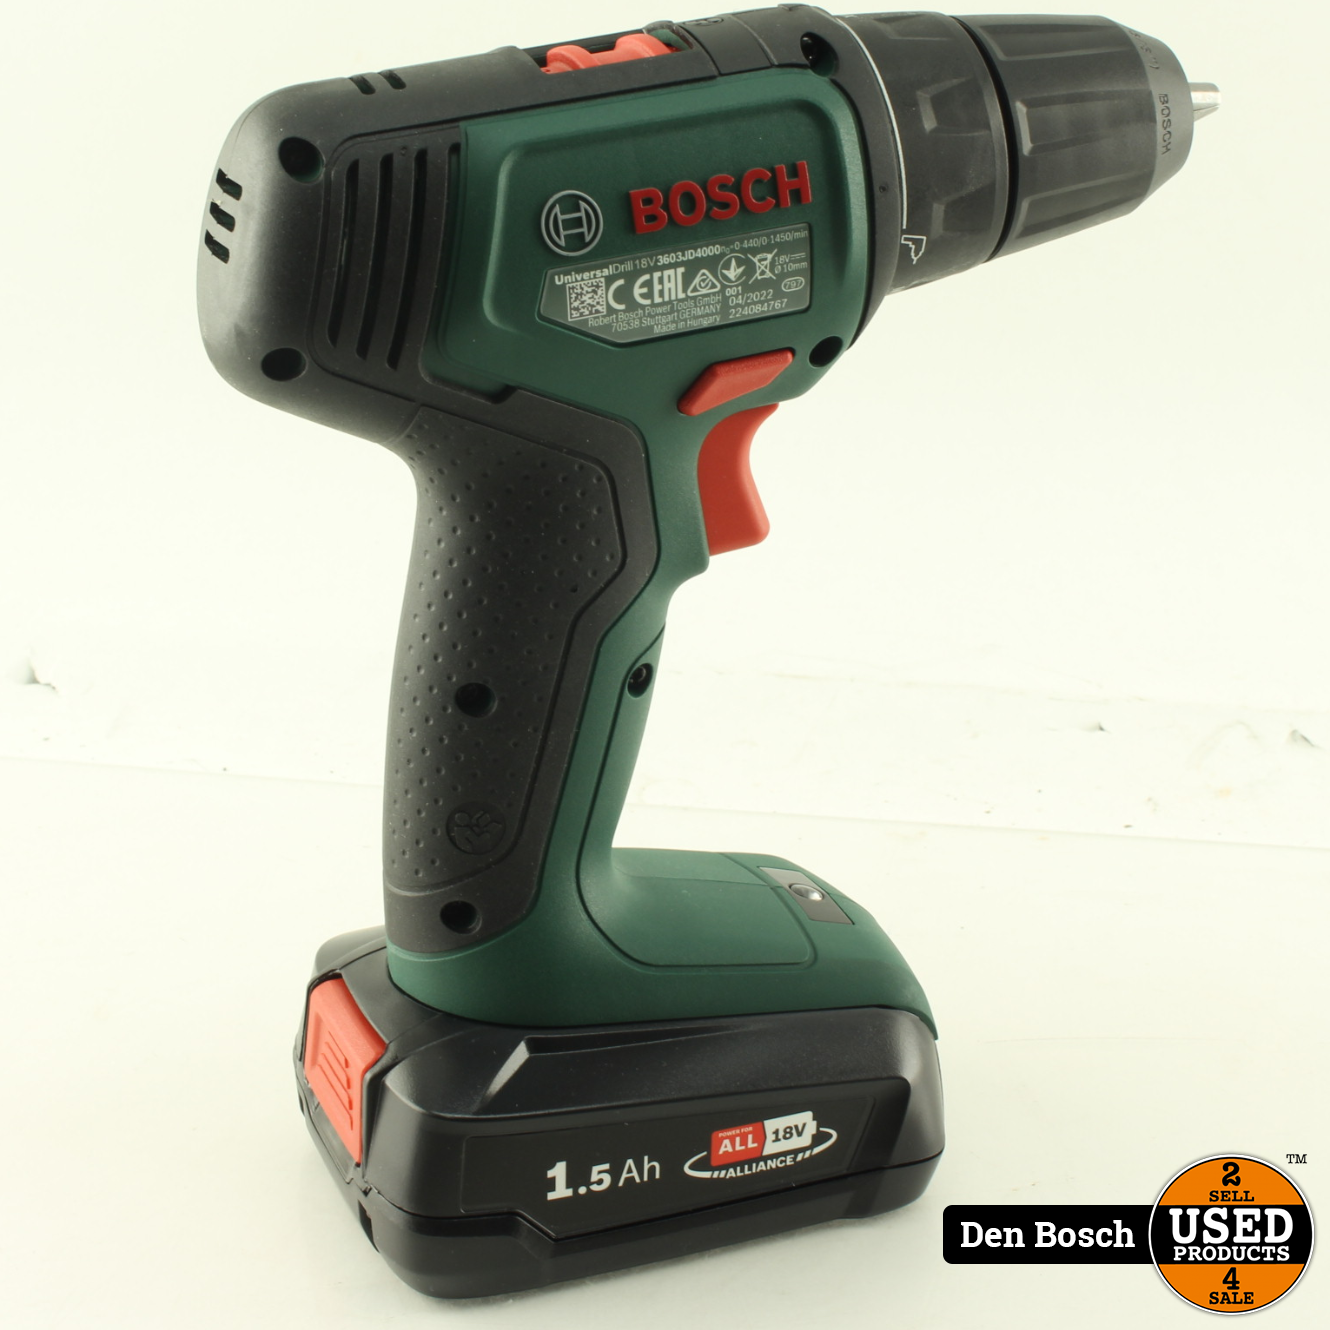 Bosch UniversalDrill 18V Boormachine + 4 Accus, Oplader en Systeembox Used Products Den Bosch